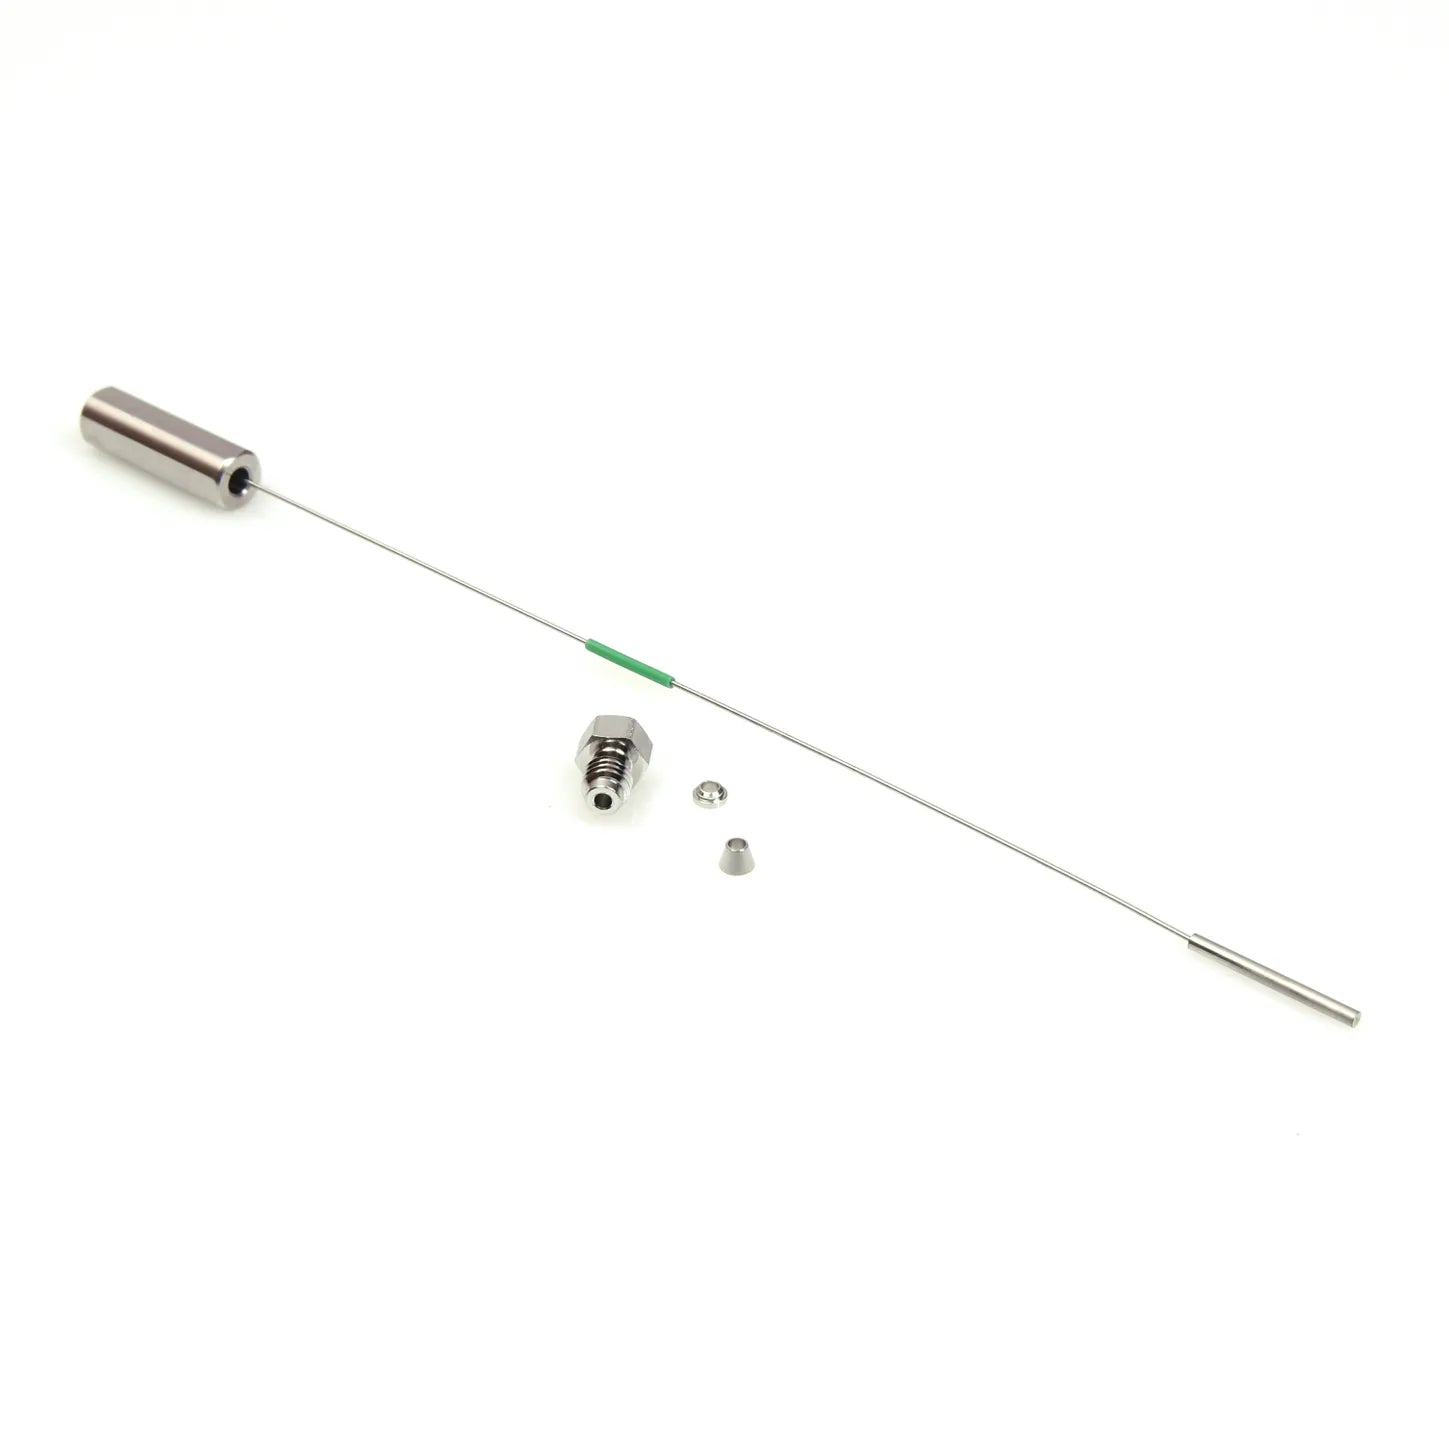 Capillary, SS, 150mm x 0.17mm, w/Nonswaged Fittings, Comparable to Agilent # G1315-87303